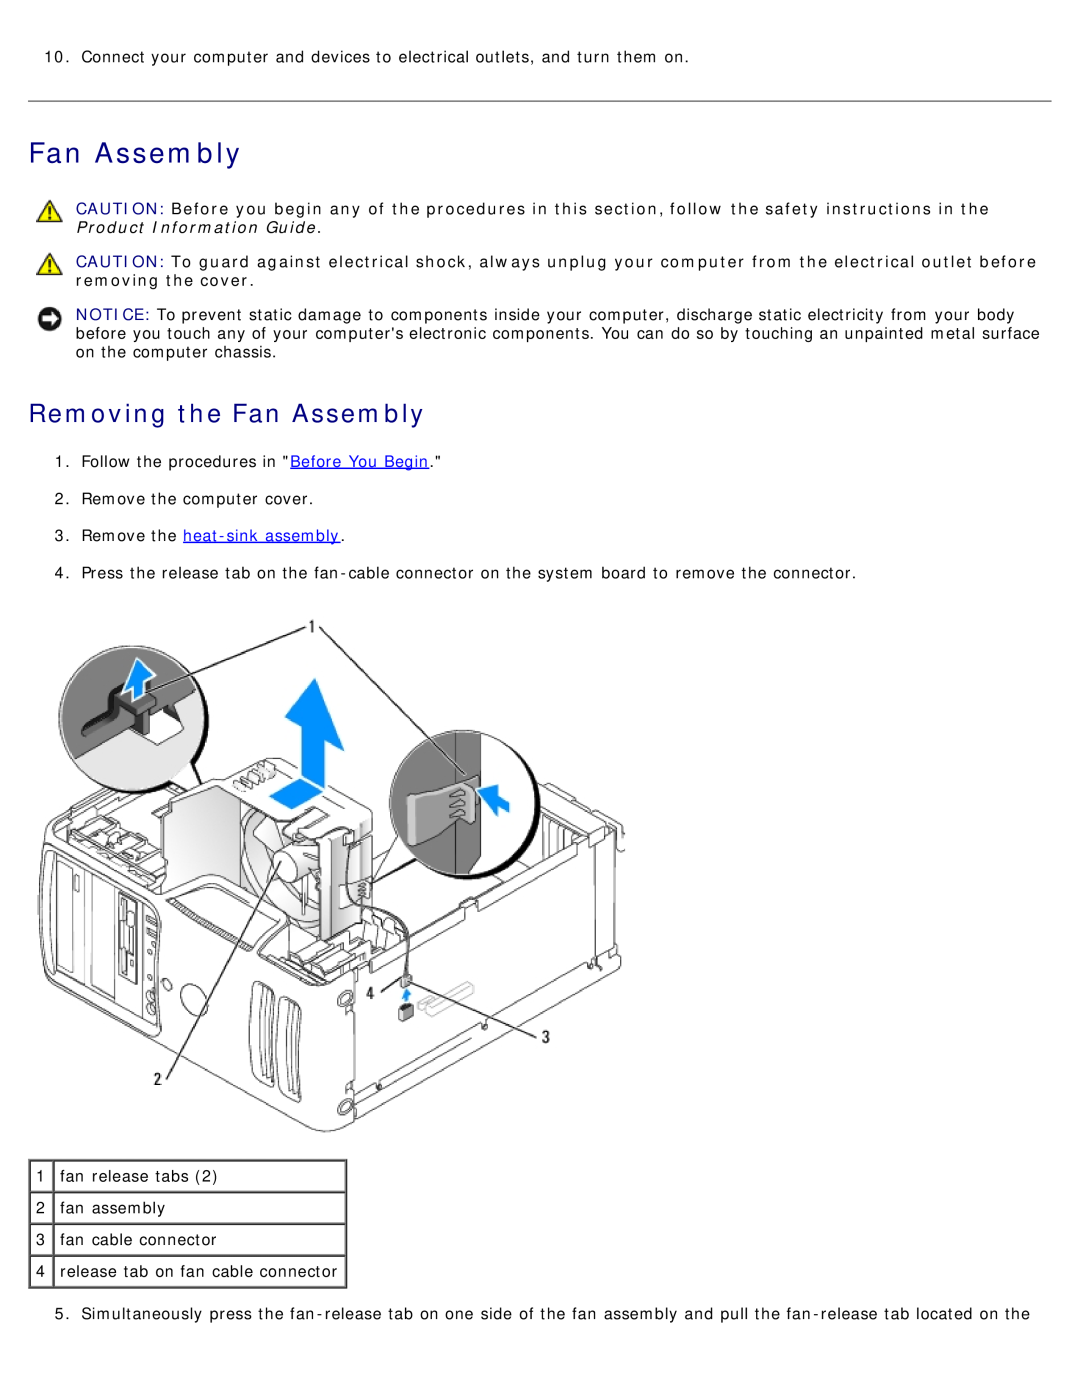 Dell DCSM manual Removing the Fan Assembly, Remove the heat-sink assembly 